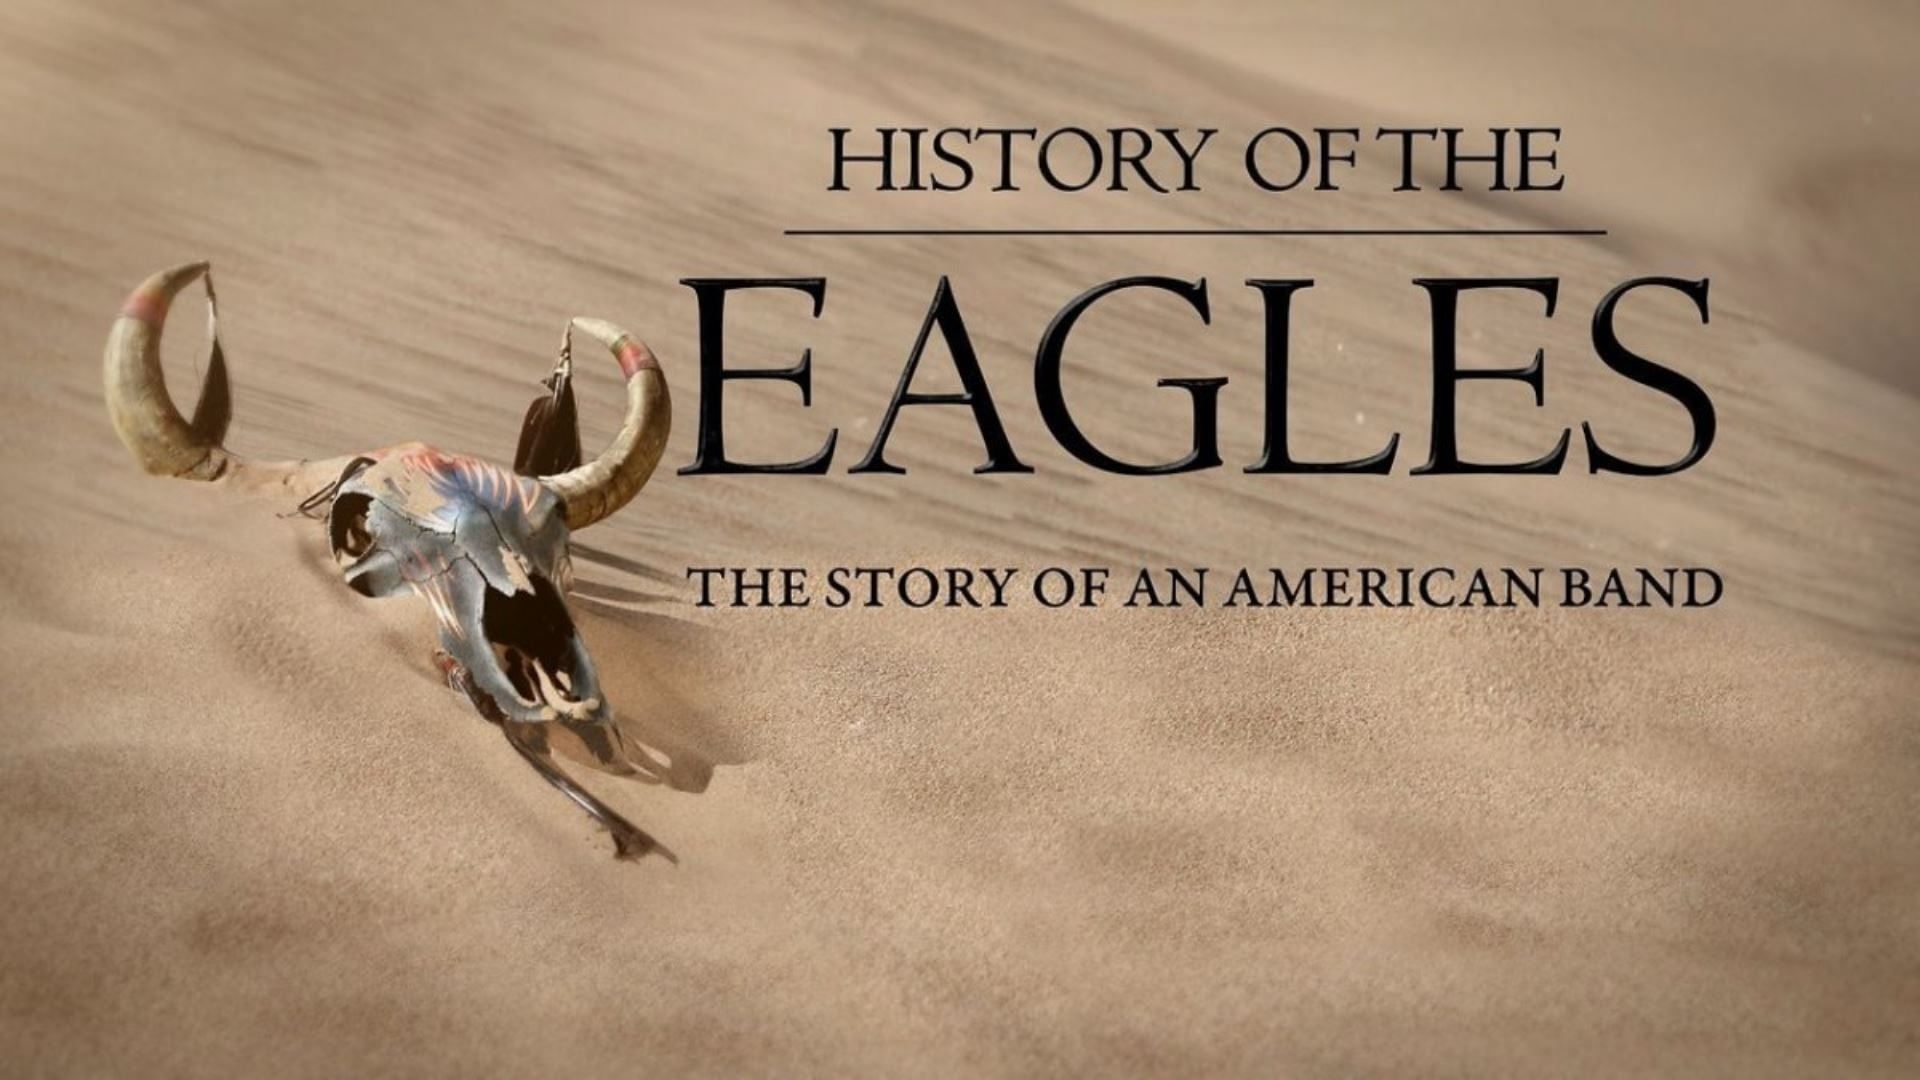 History of the Eagles background